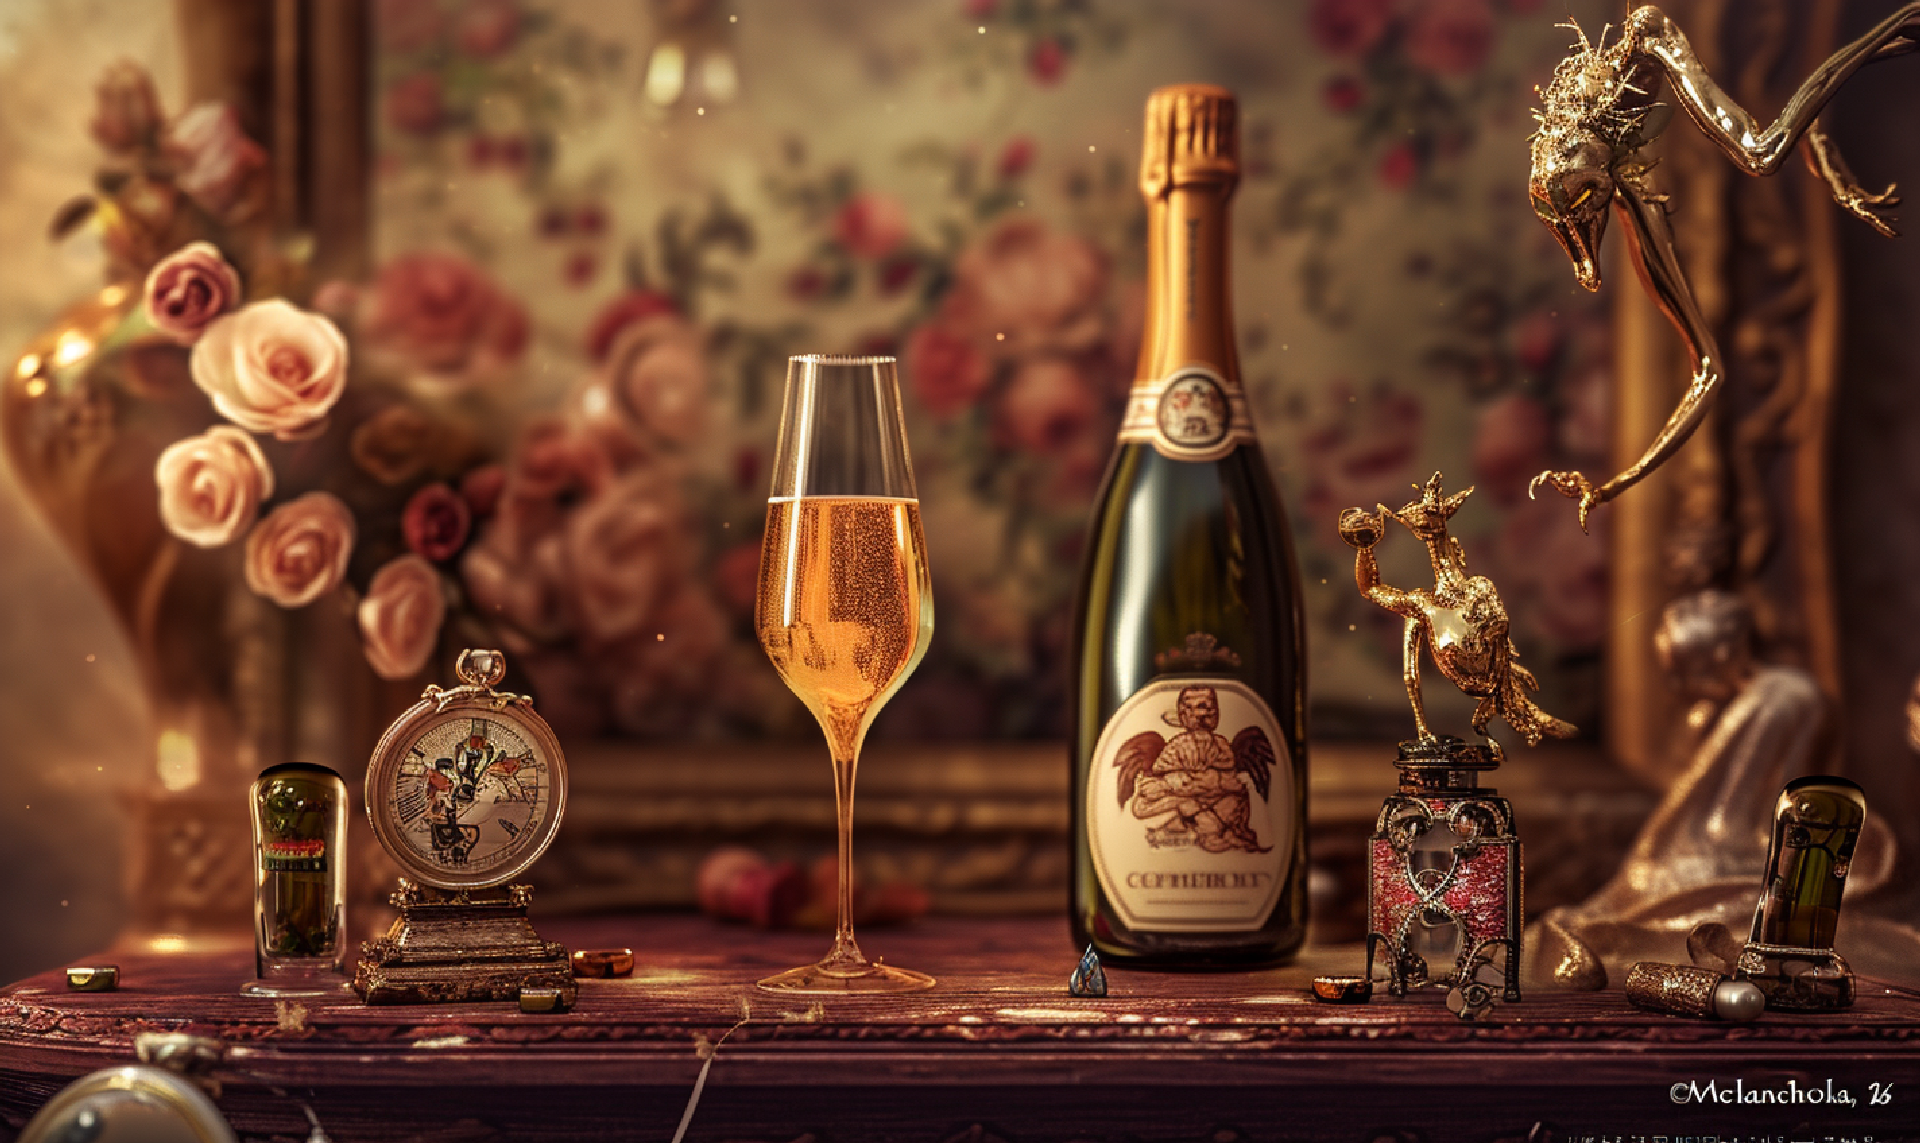 A refined display of Blanc de Blanc champagne, showcasing its clarity and elegance, perfect for wine enthusiasts.